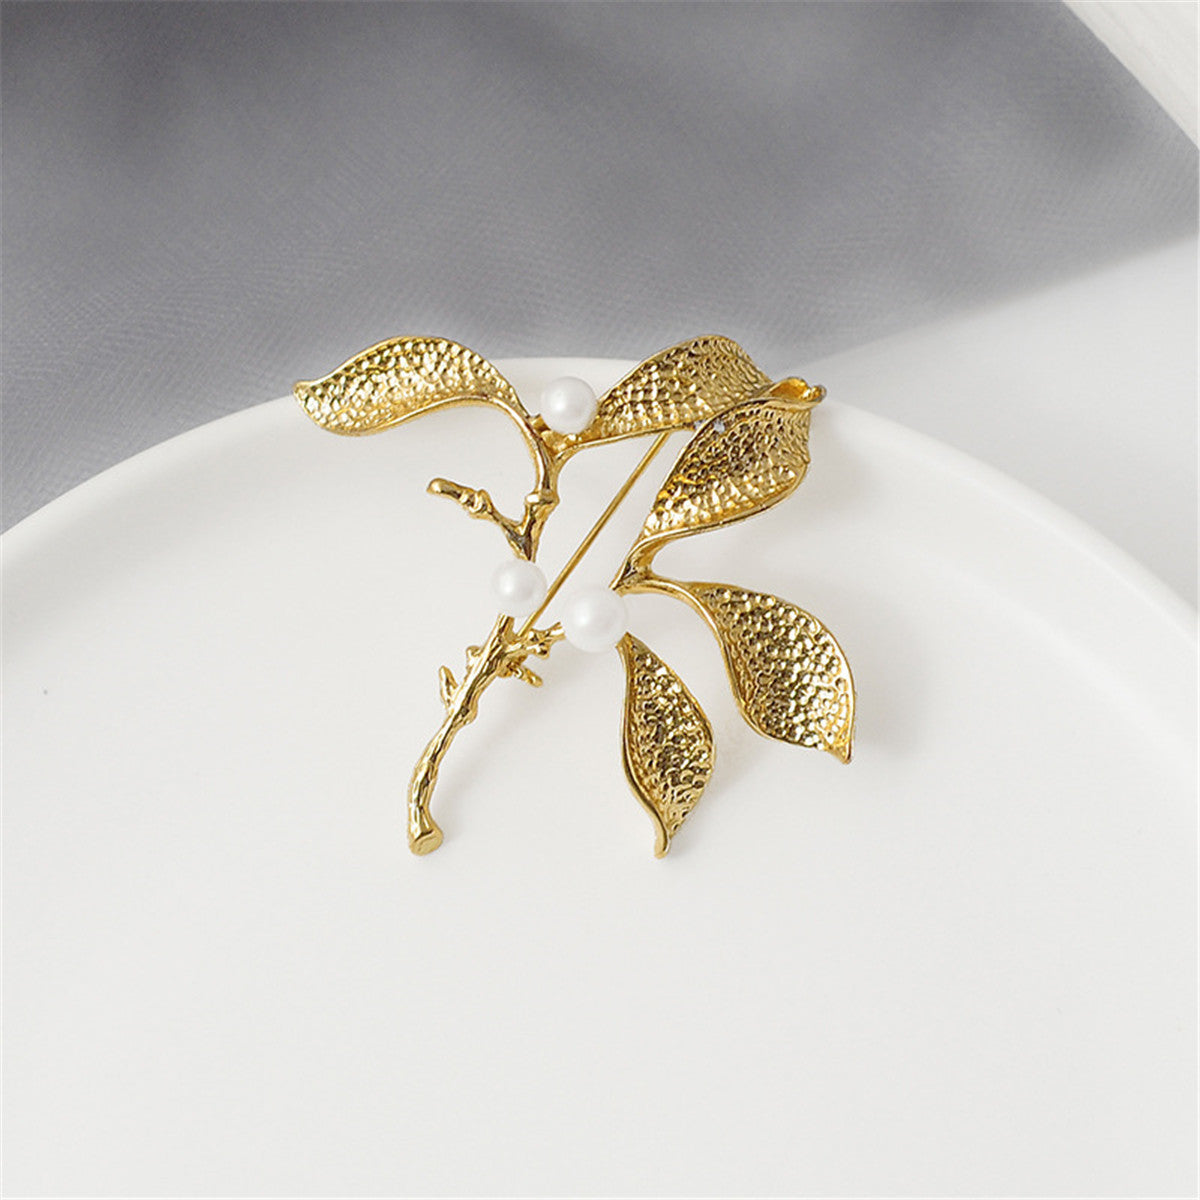 Pearl & 18K Gold-Plated Botany Brooch